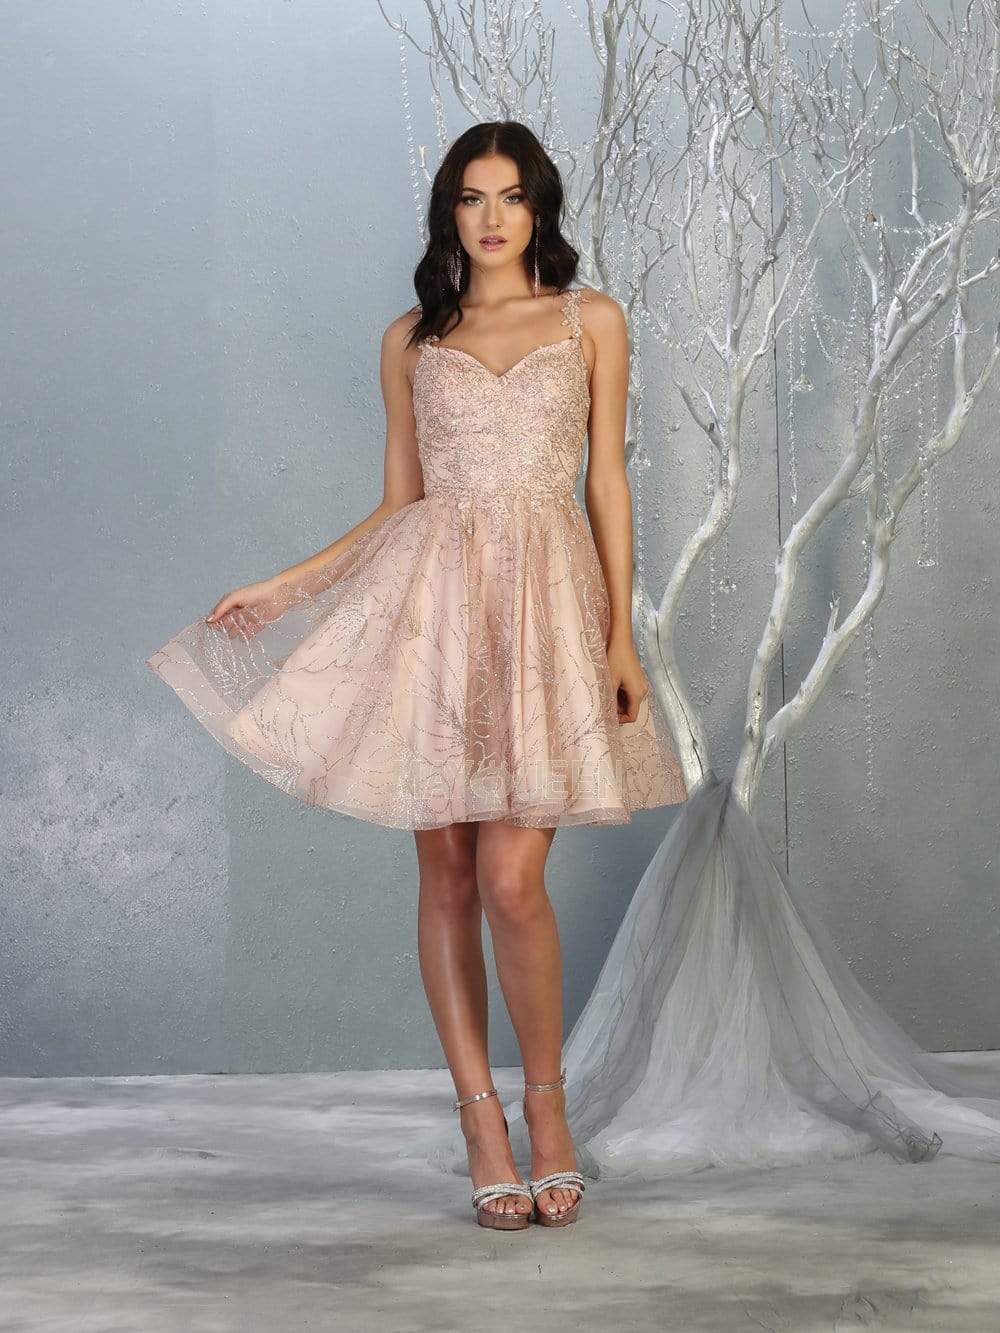 May Queen - MQ1753 Appliqued Sweetheart Cocktail Dress Homecoming Dresses 4 / Rosegold